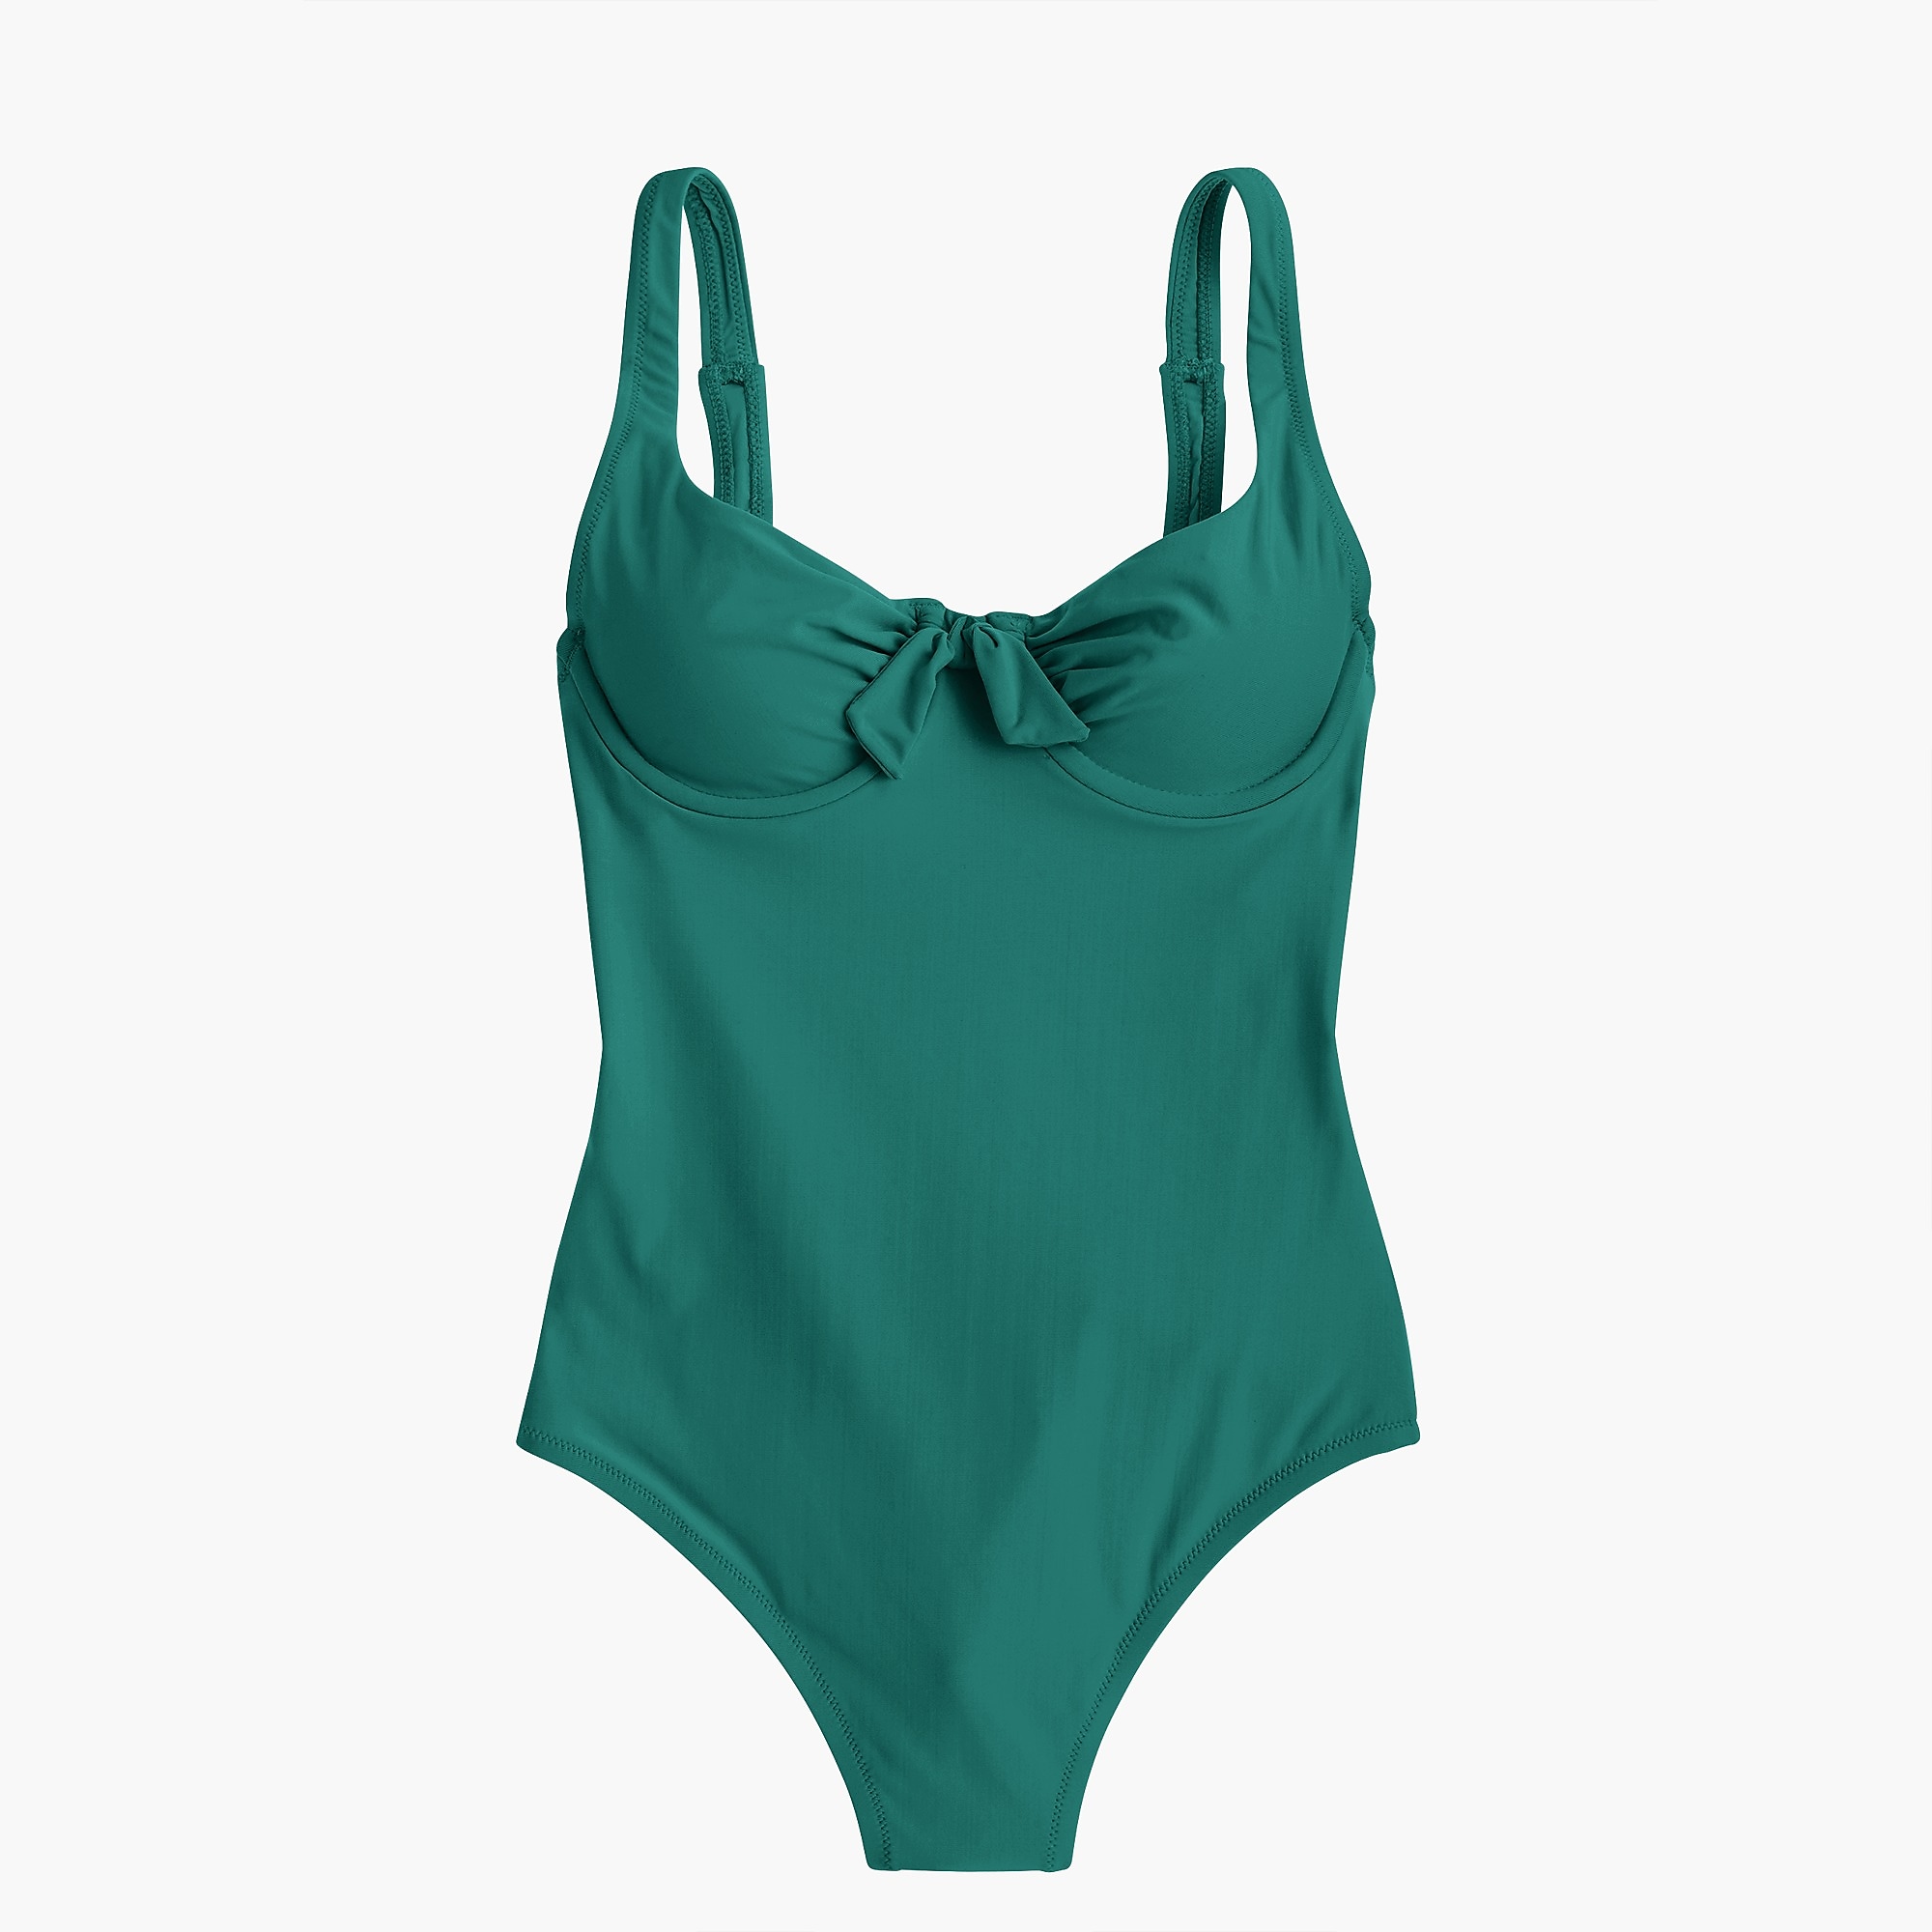 J.Crew: Underwire Scoopback One-piece Swimsuit For Women